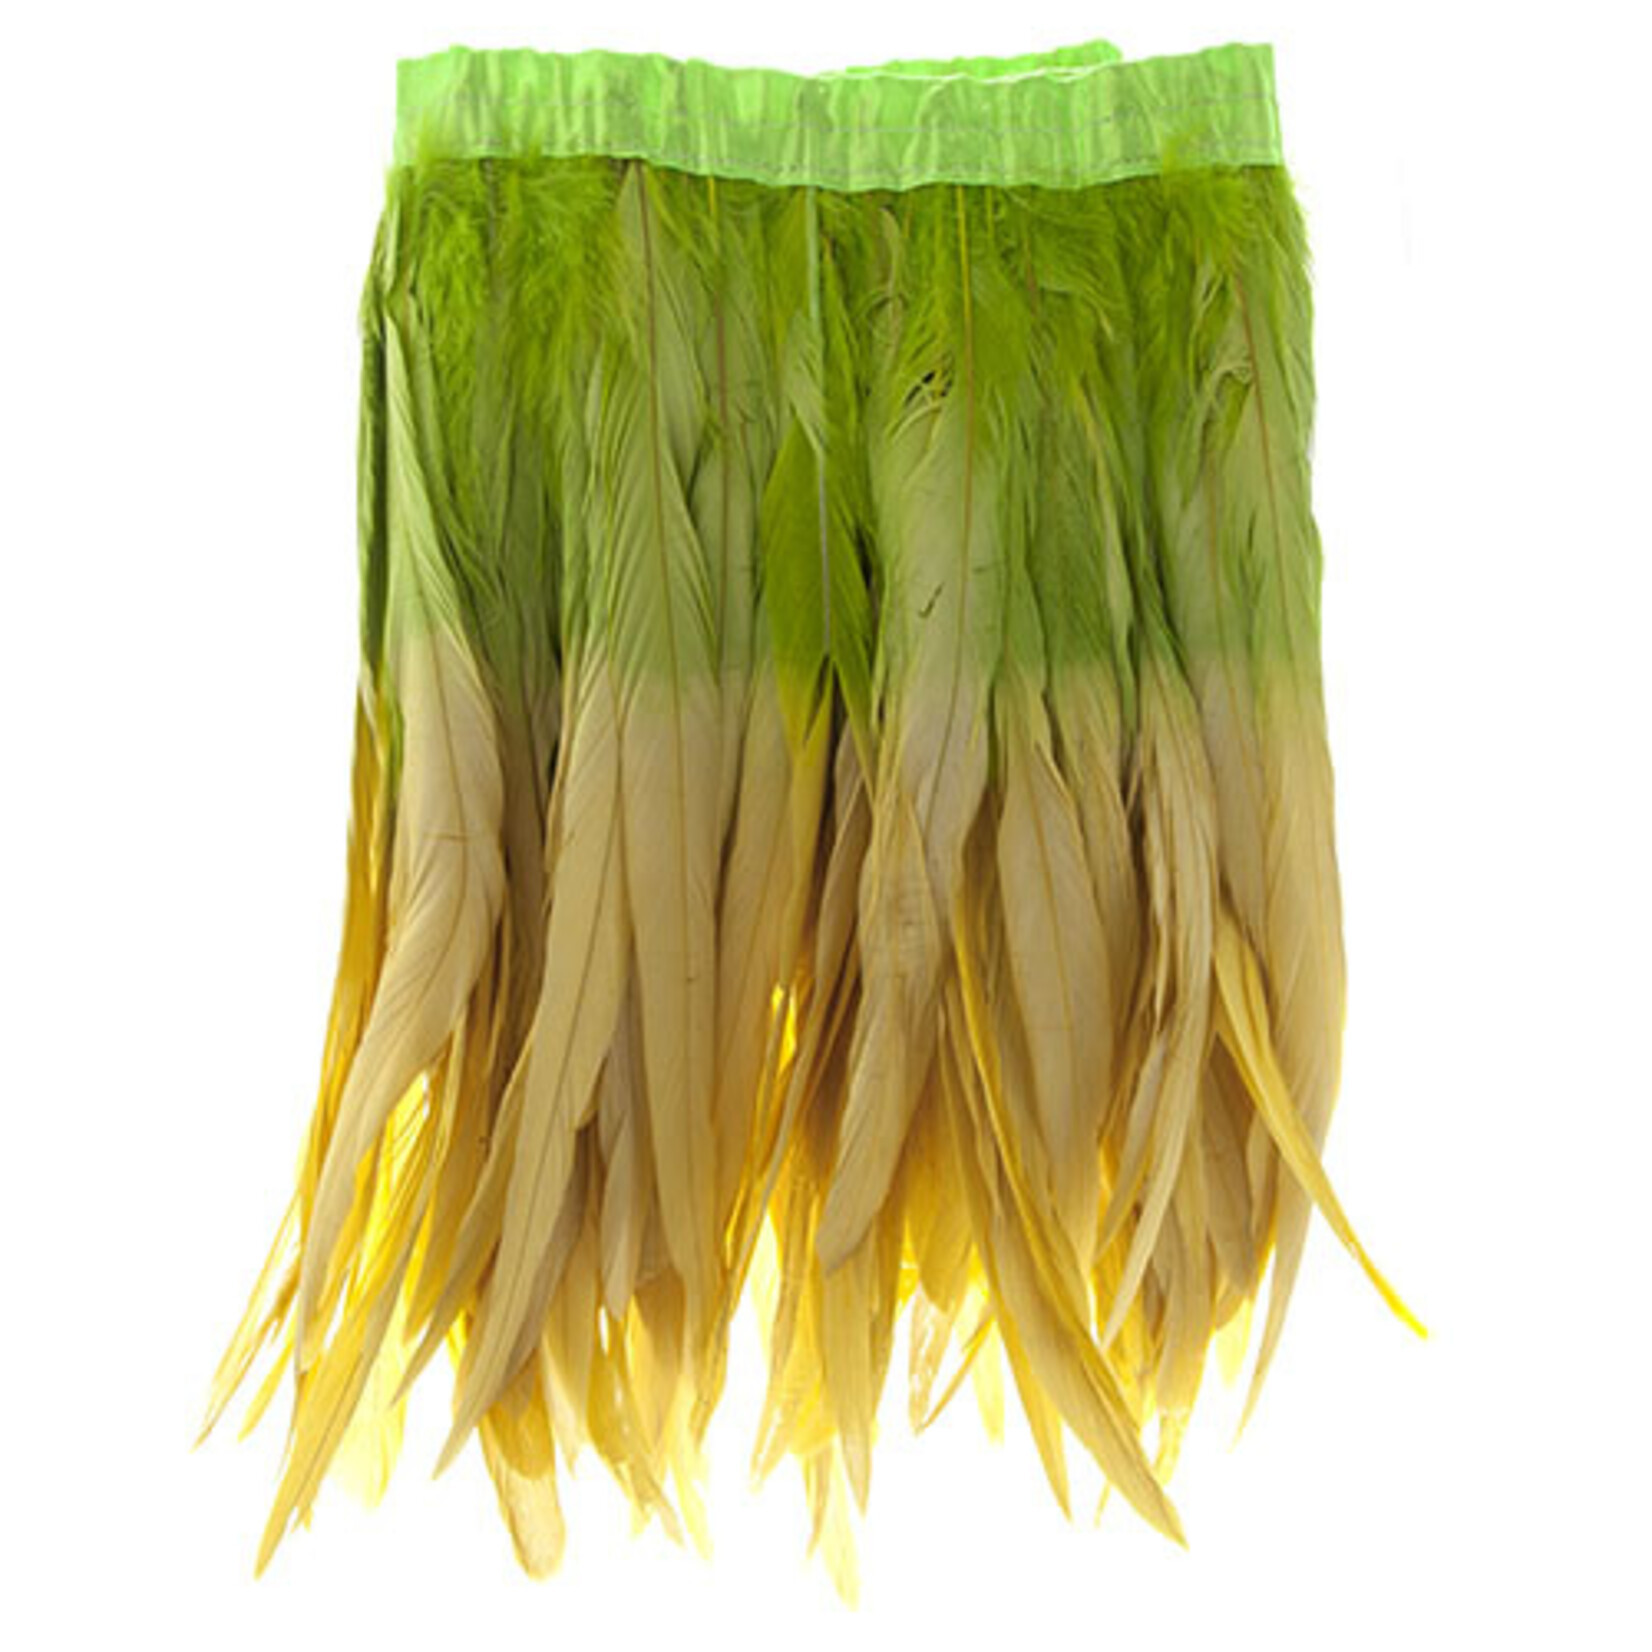 Coque Feathers Value 2 Tone 12 - 14 Inches Lemon/Lime